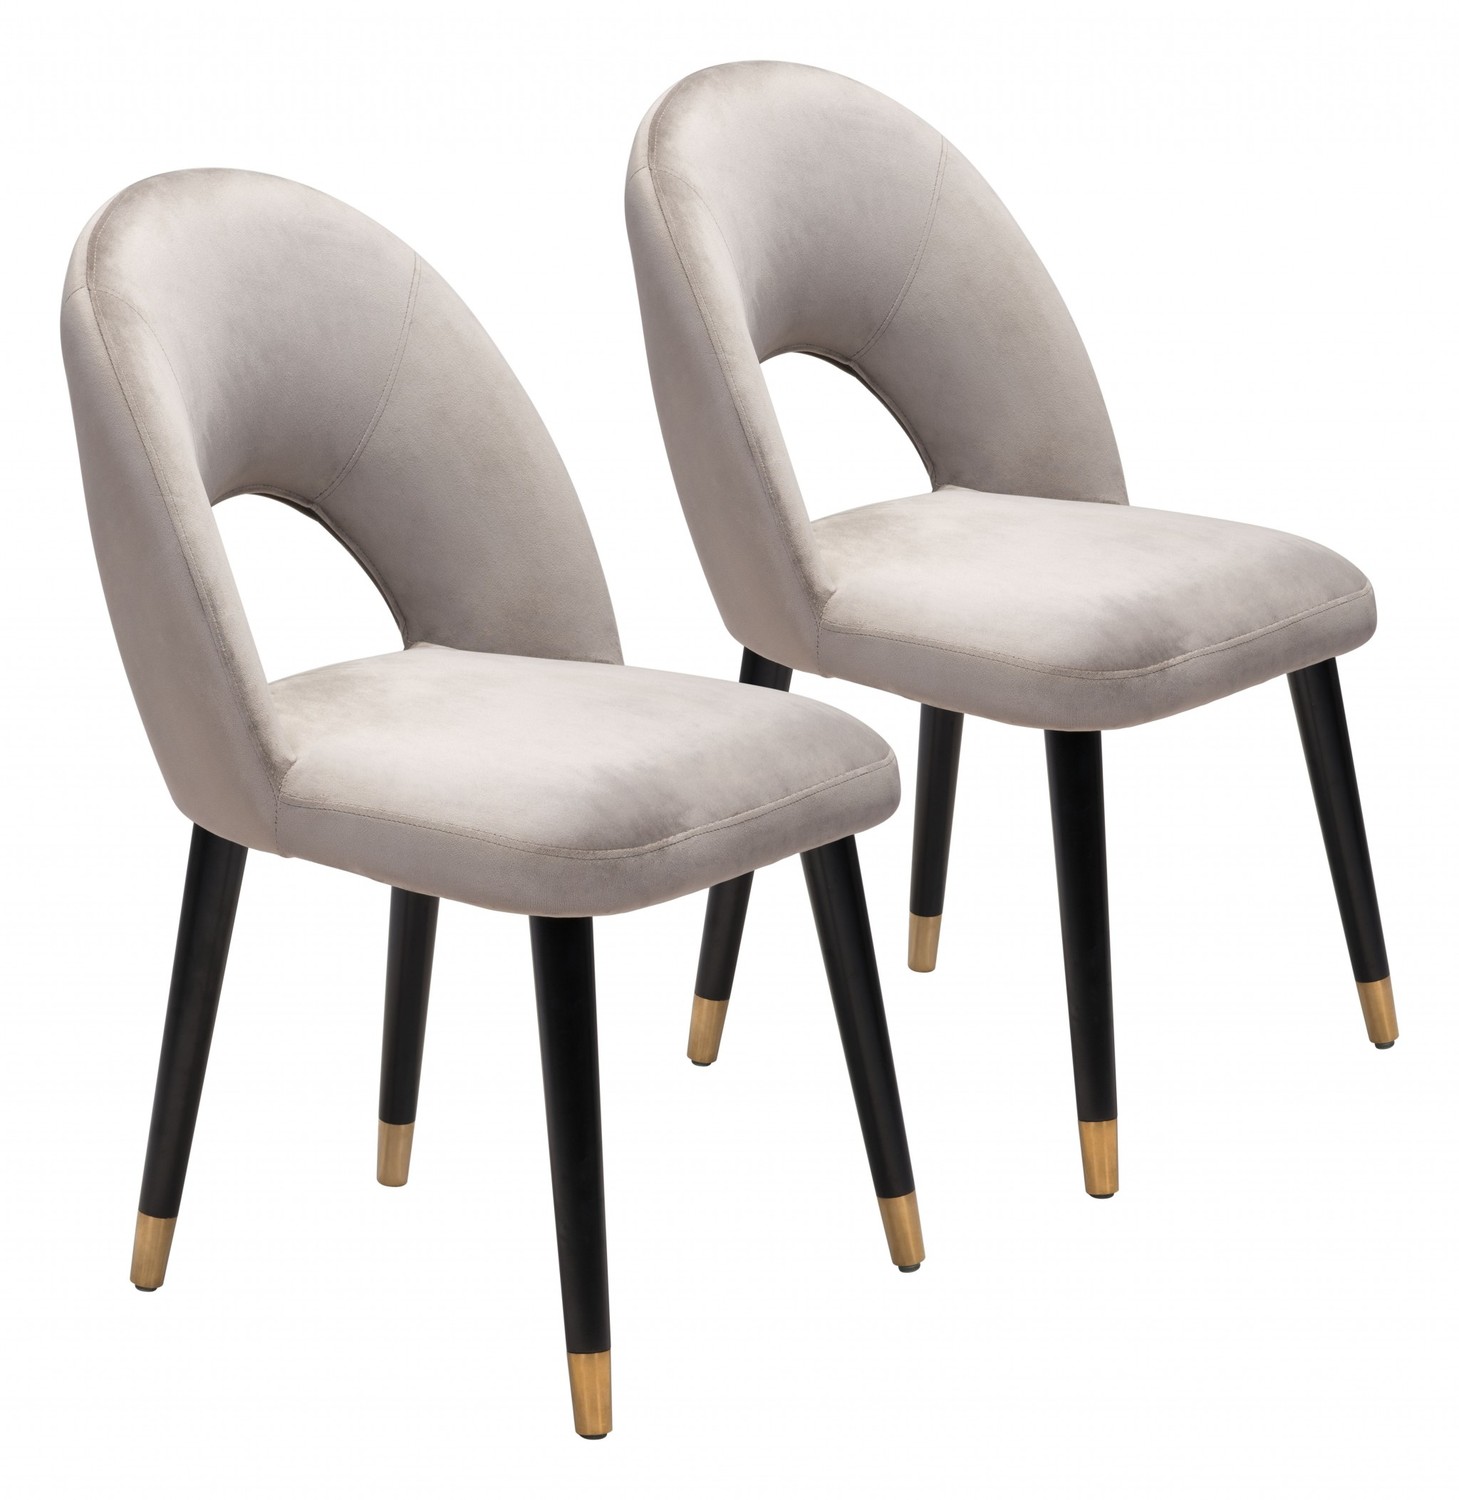 Set of Two Gray Thick Loop Back Dining Chairs